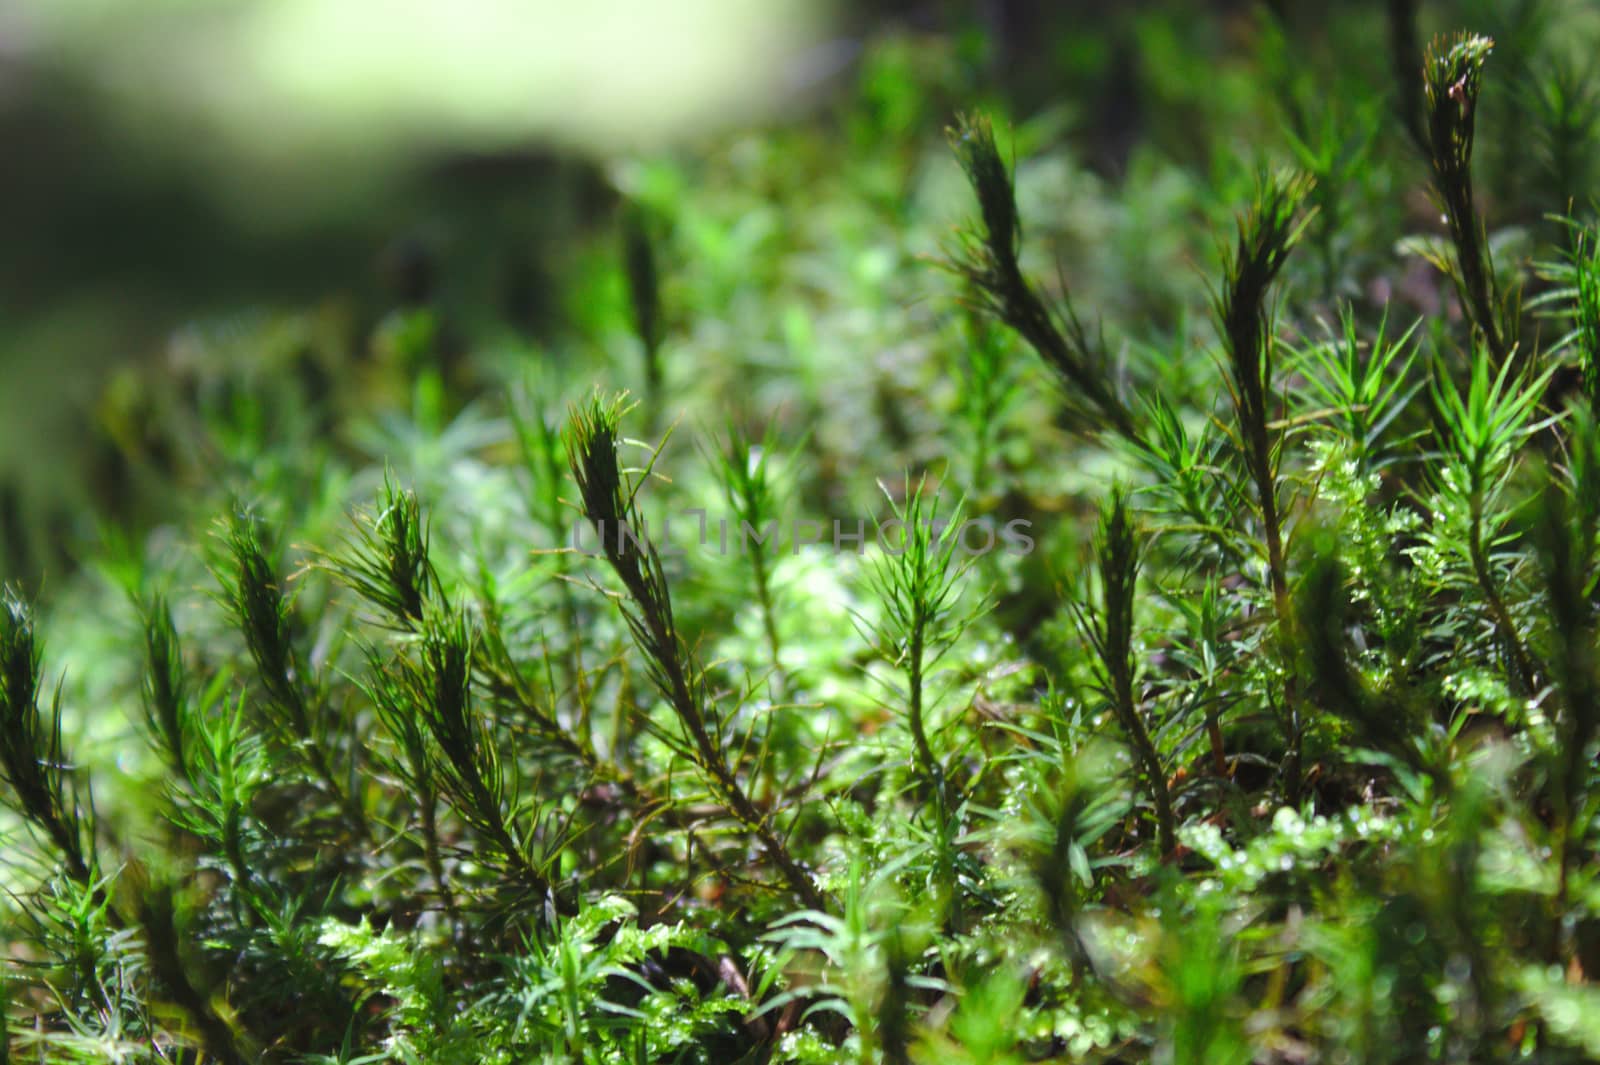 The picture shows green moss in the forest